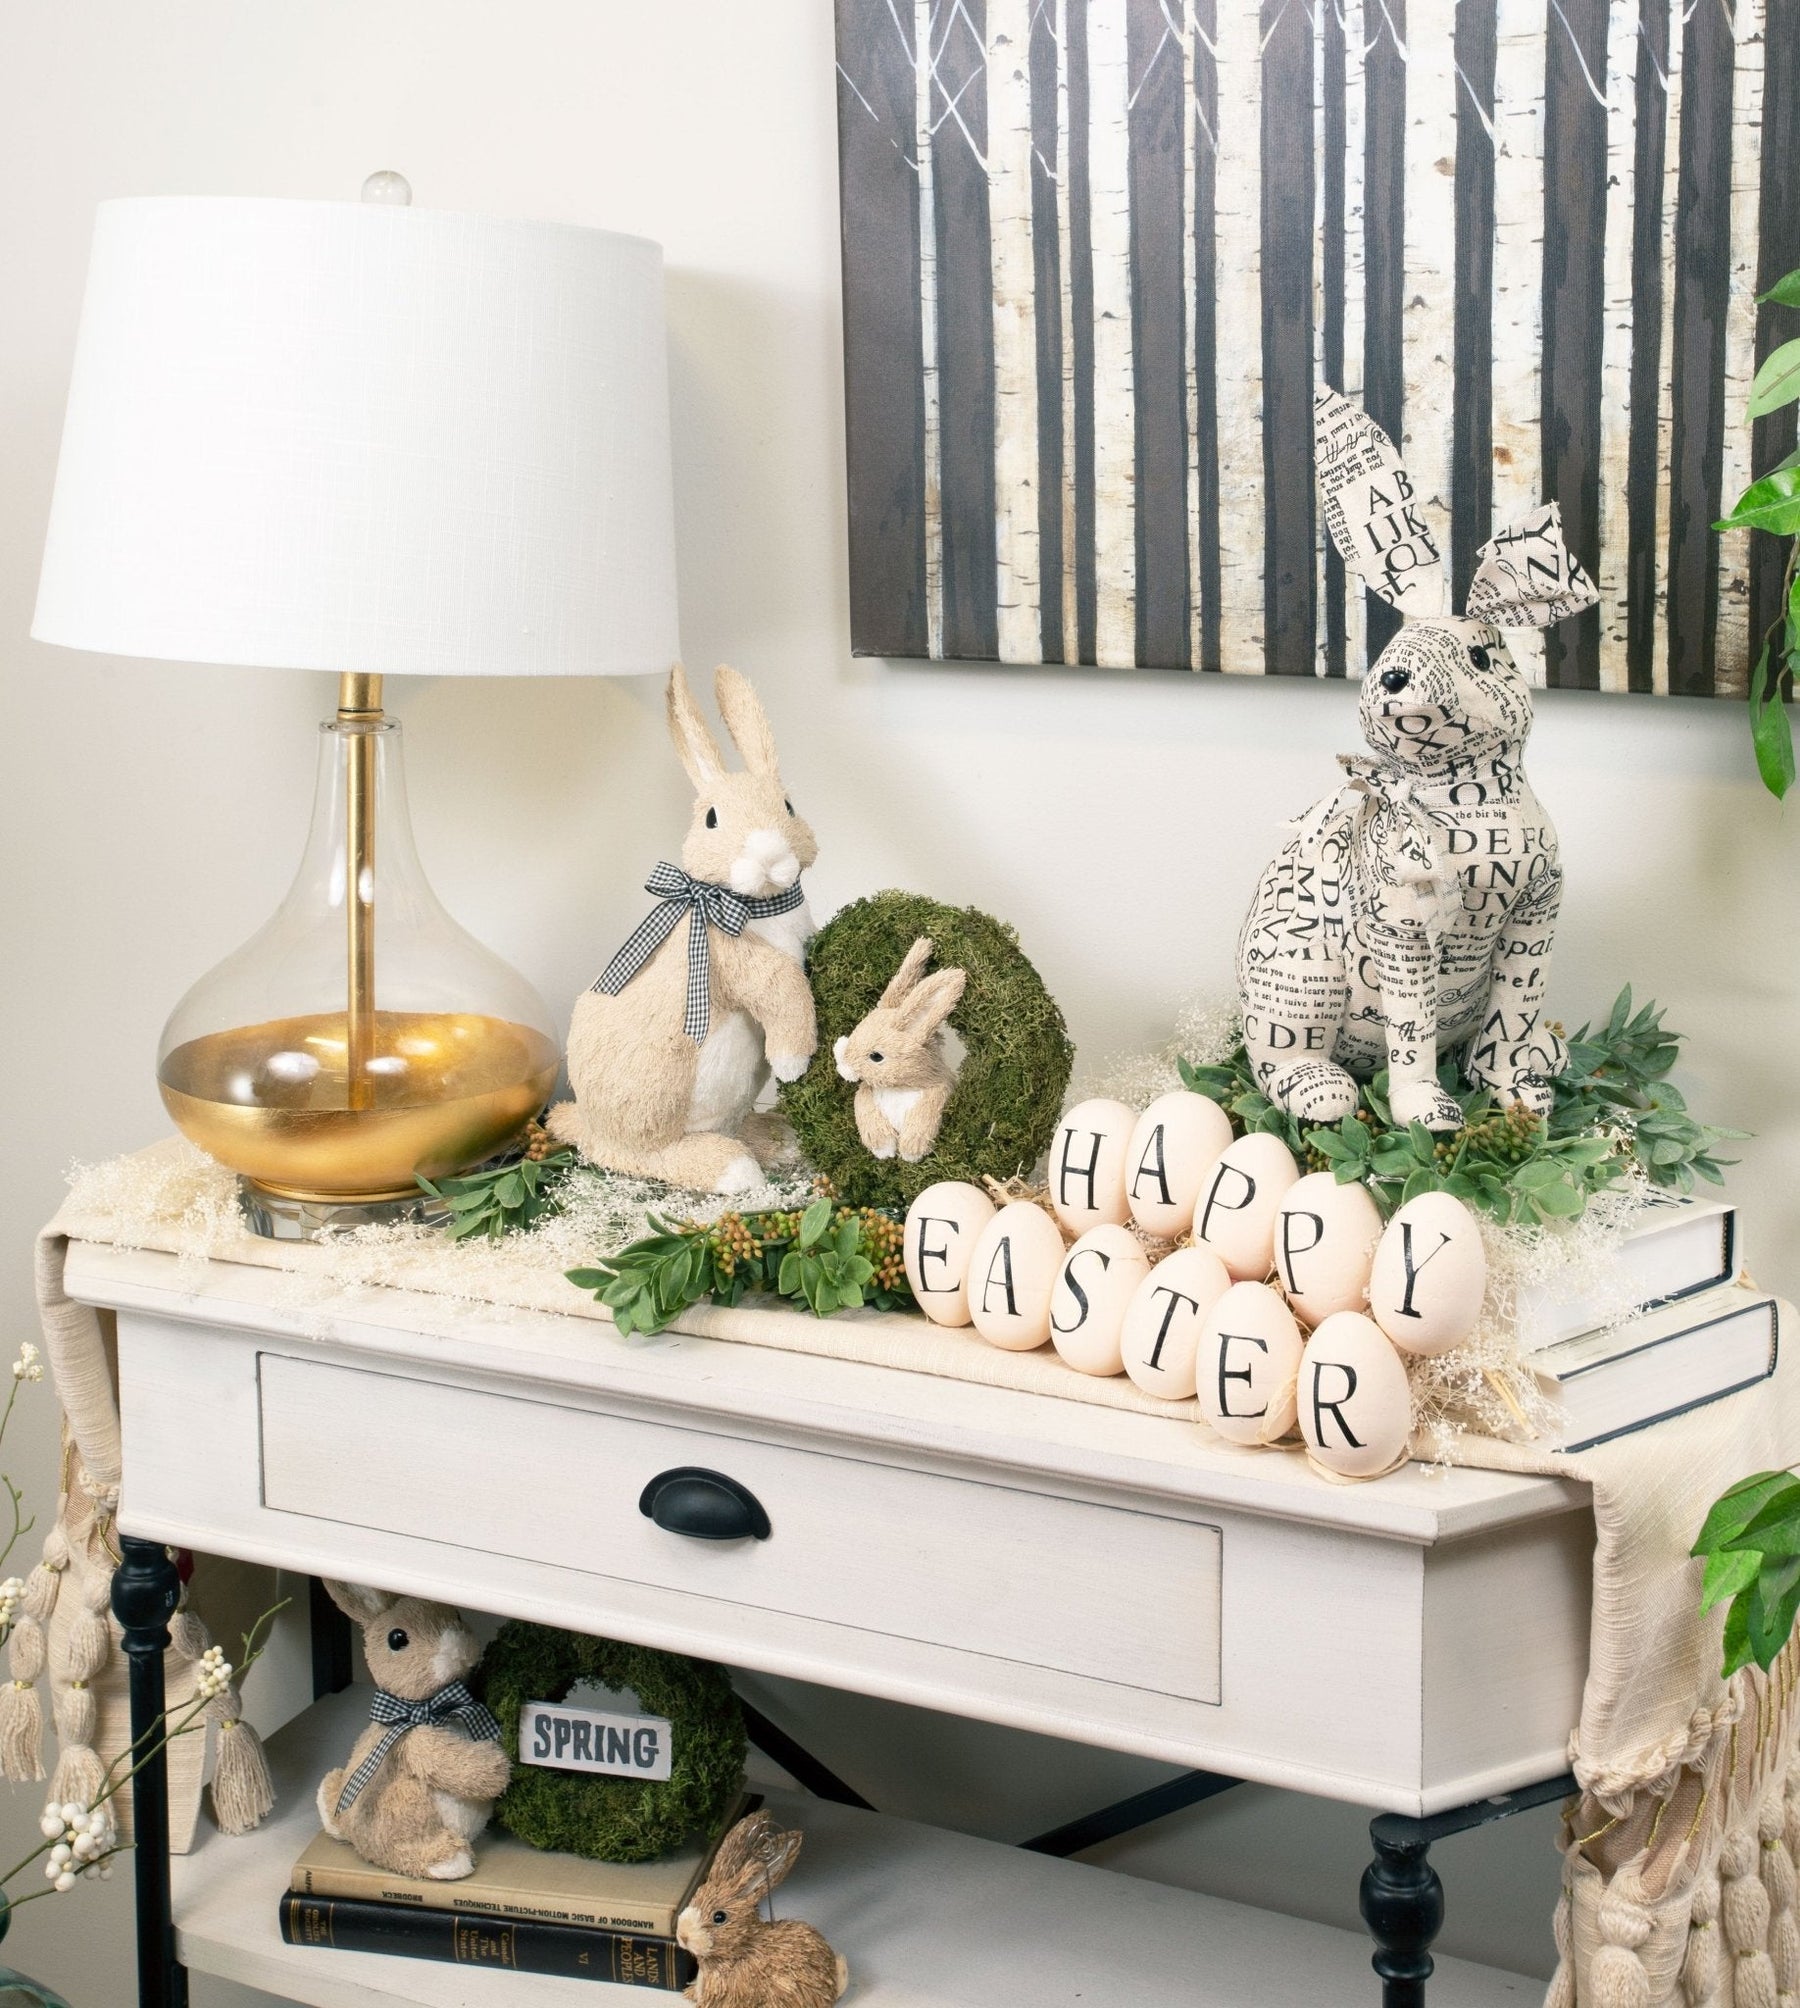 Easy Easter Decorating Ideas to Welcome Spring, Room by Room - Pier 1